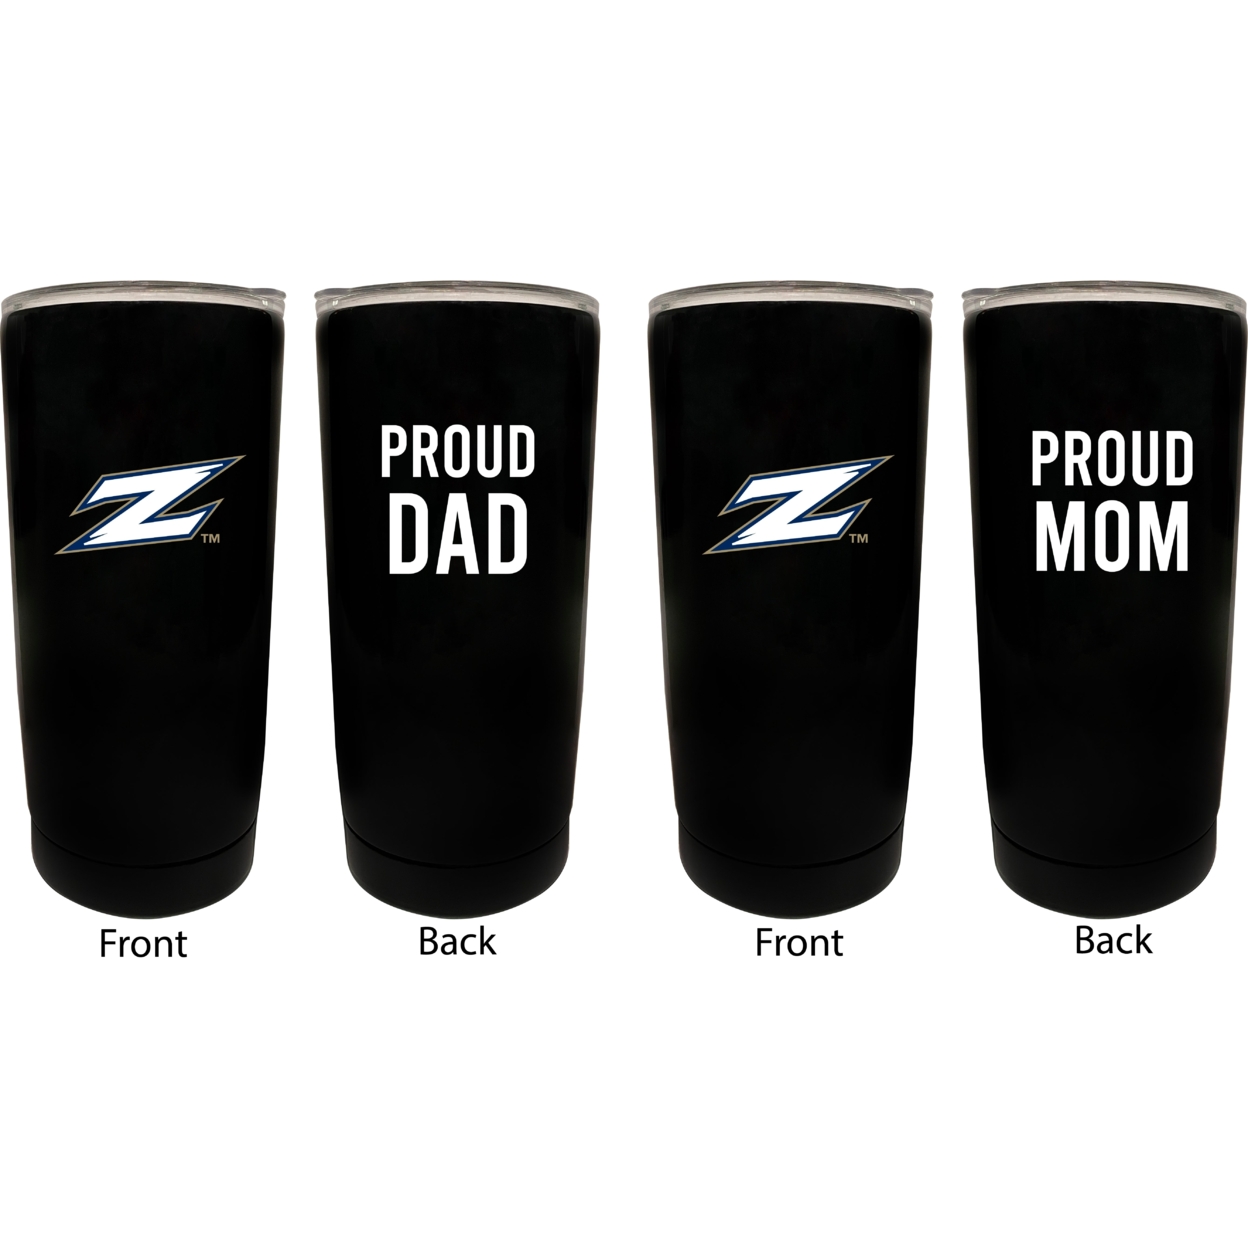 Akron Zips Proud Mom And Dad 16 Oz Insulated Stainless Steel Tumblers 2 Pack Black.